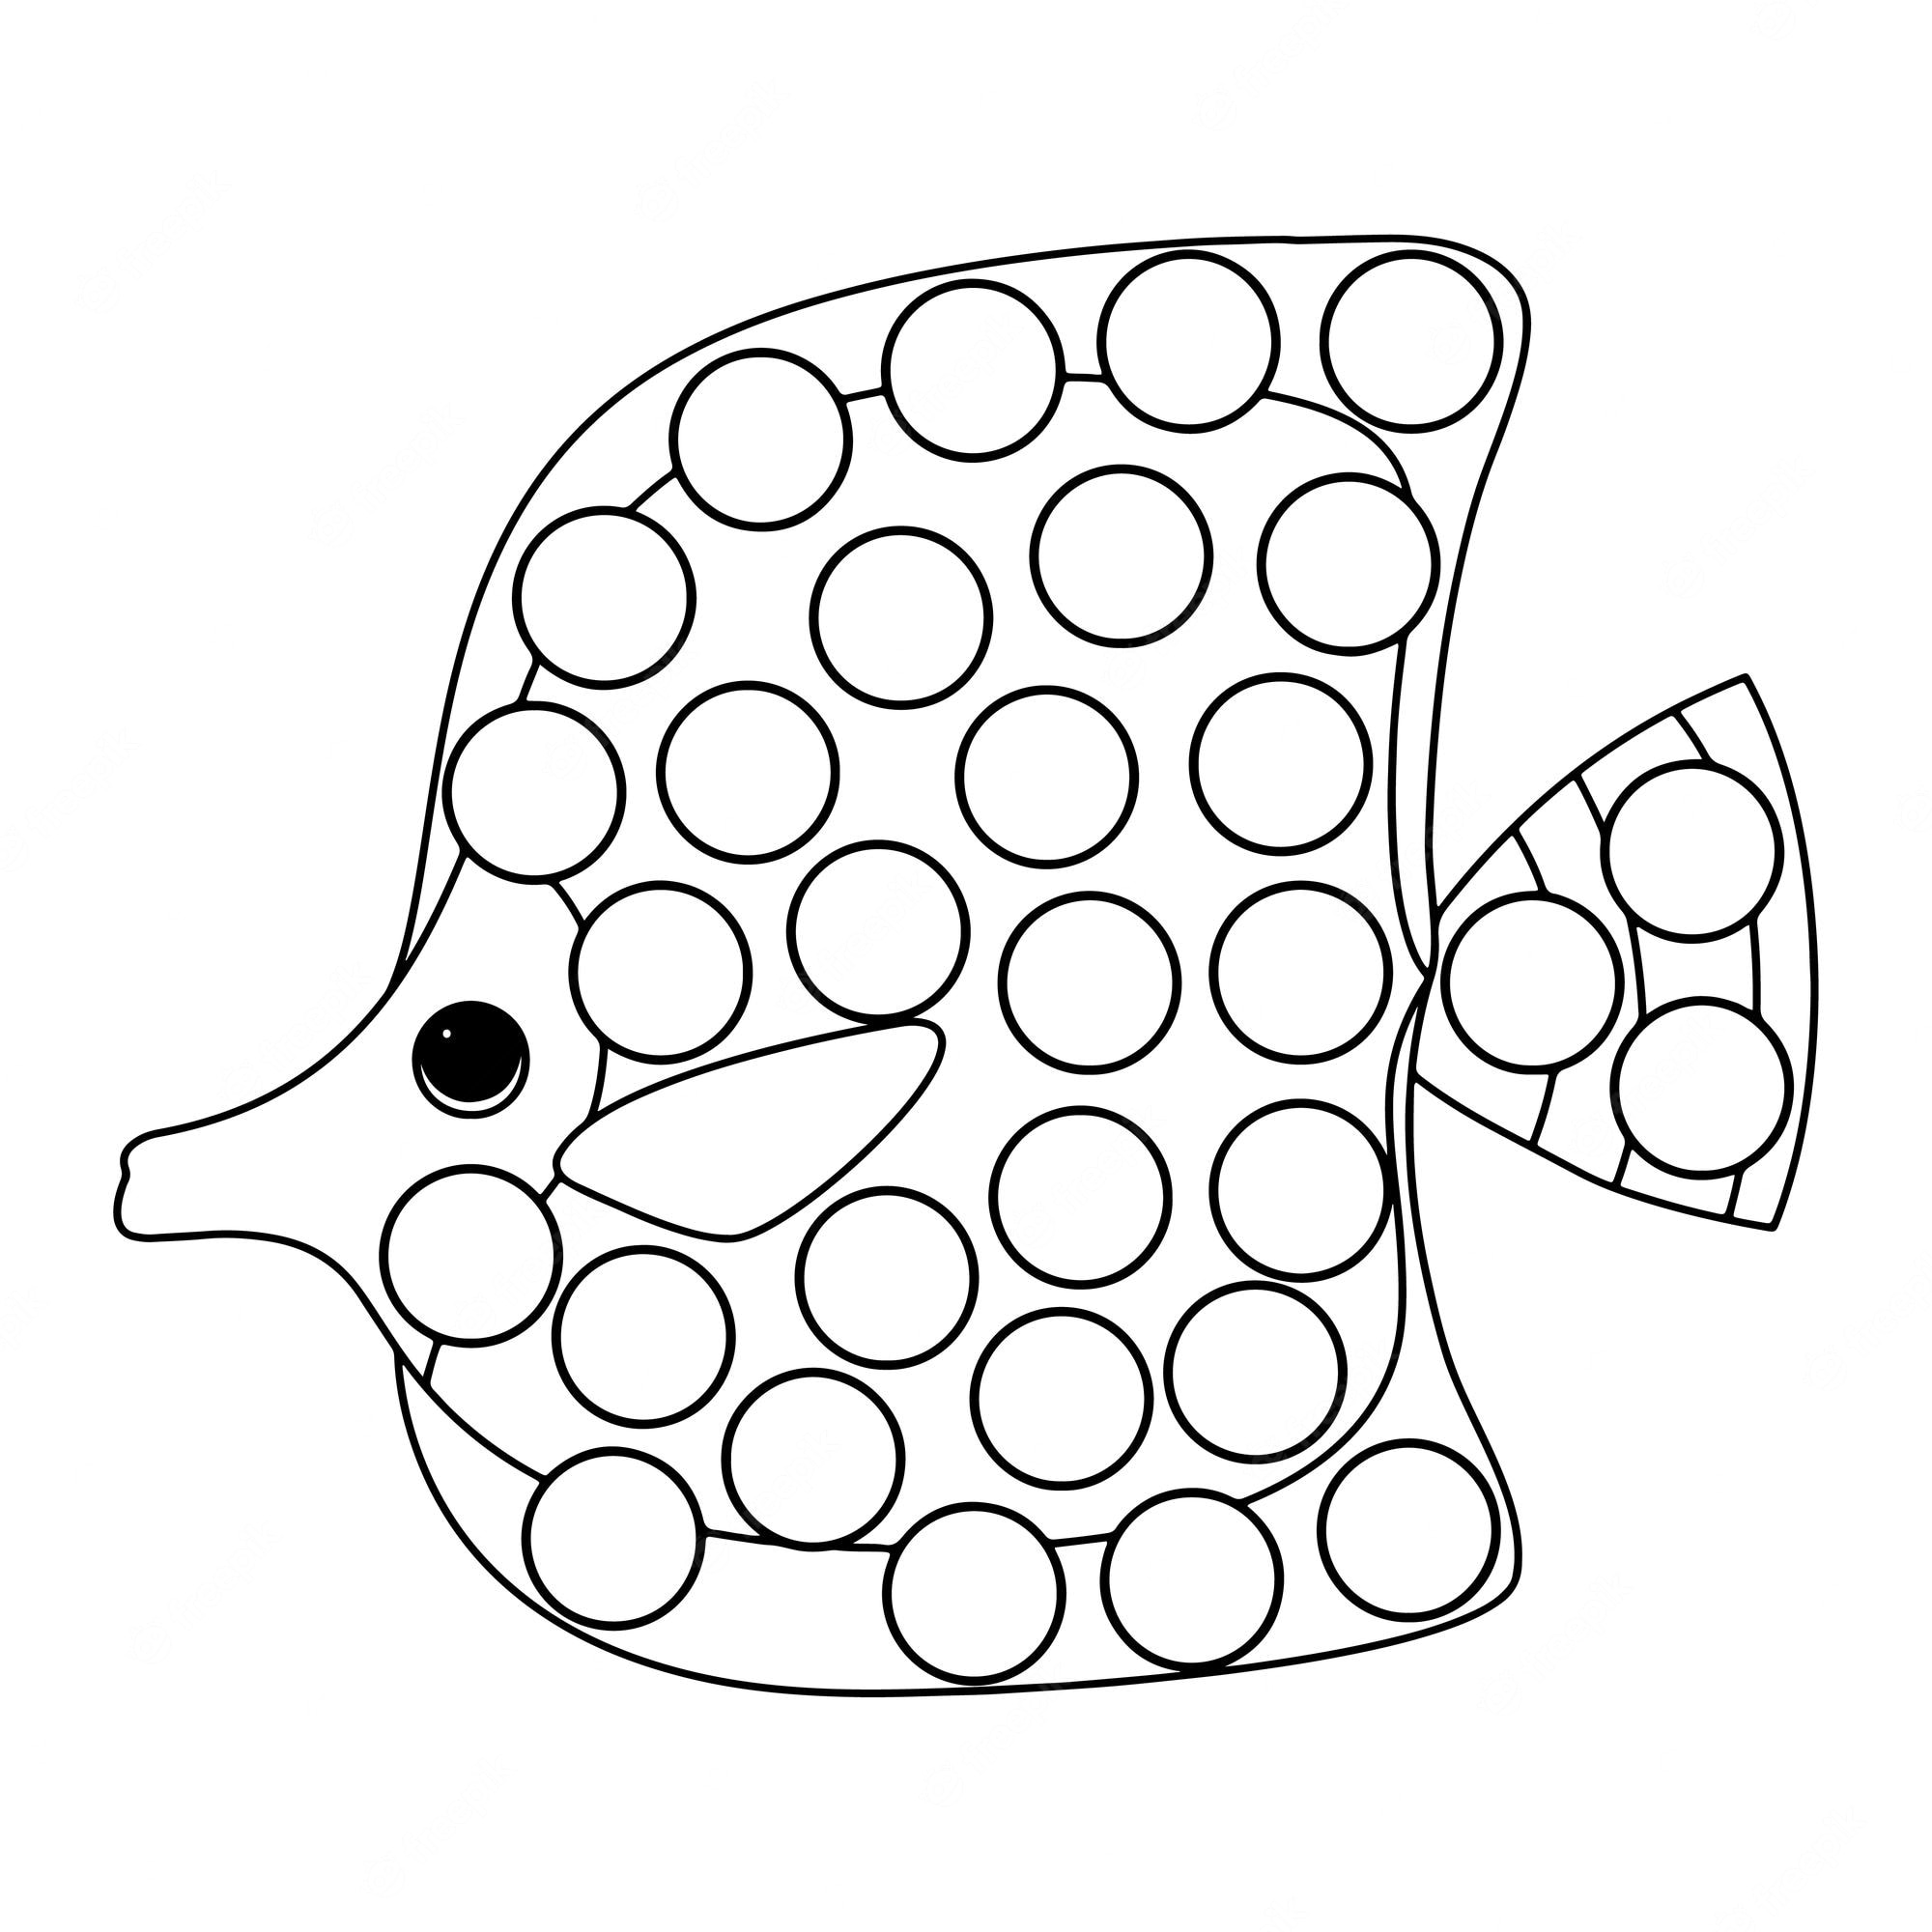 Premium Vector | Ocean animals dot marker coloring pages for kids